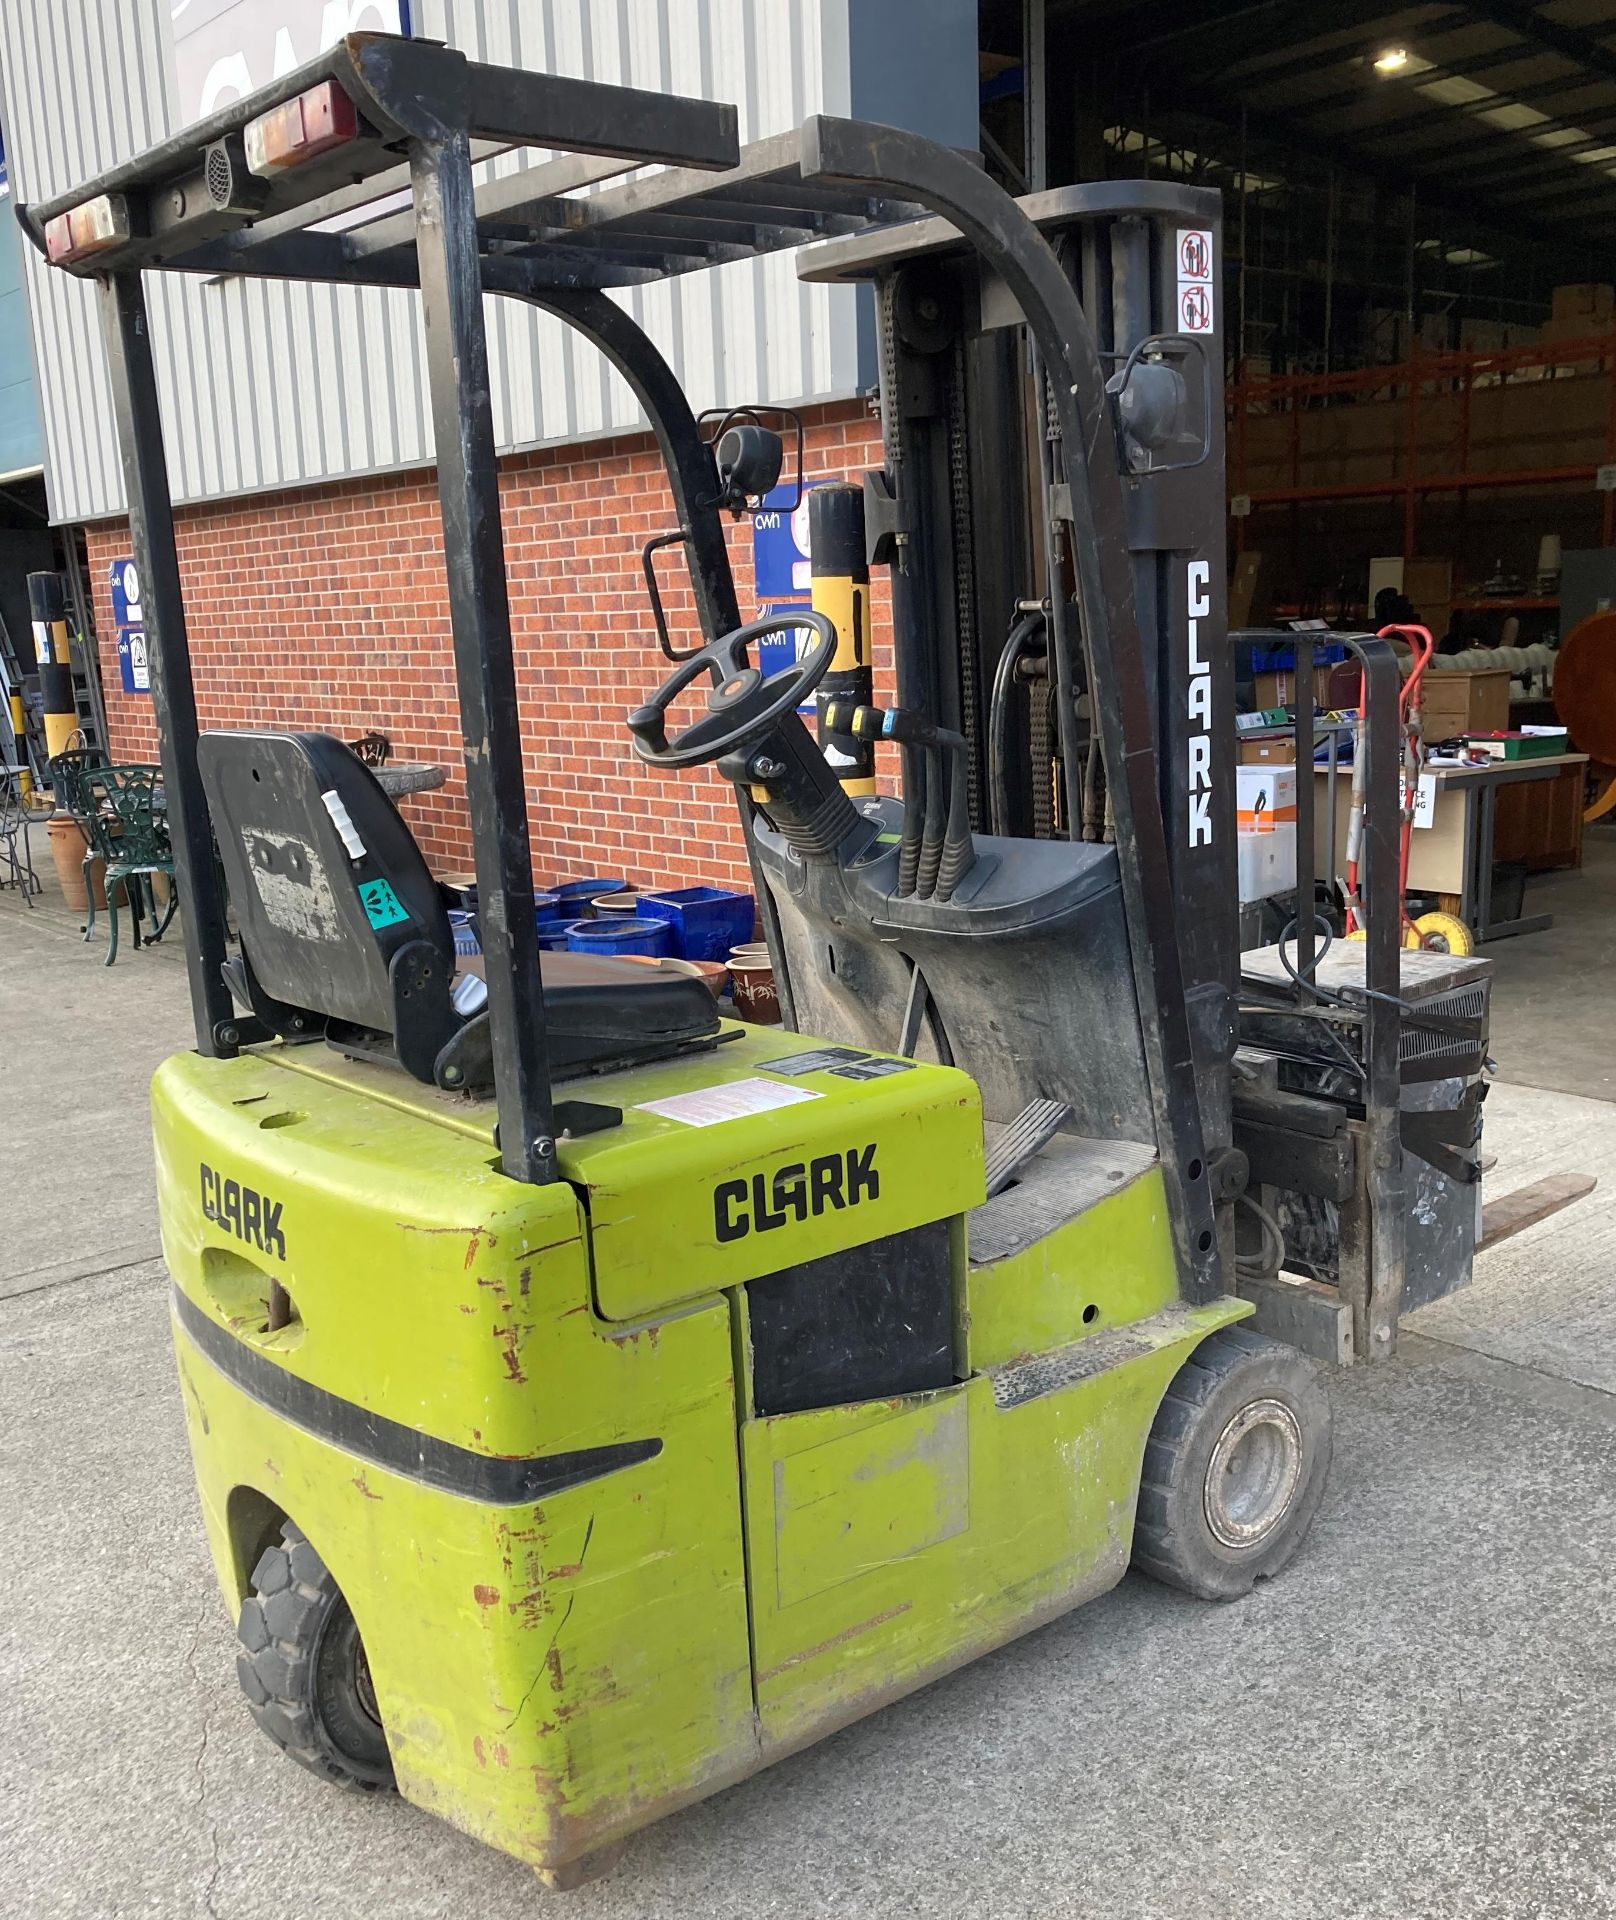 CLARK ELECTRIC FORK TRUCK - MODEL: TMX15C. Fitted with side shift - green. Capacity: 1500kg. - Image 6 of 9